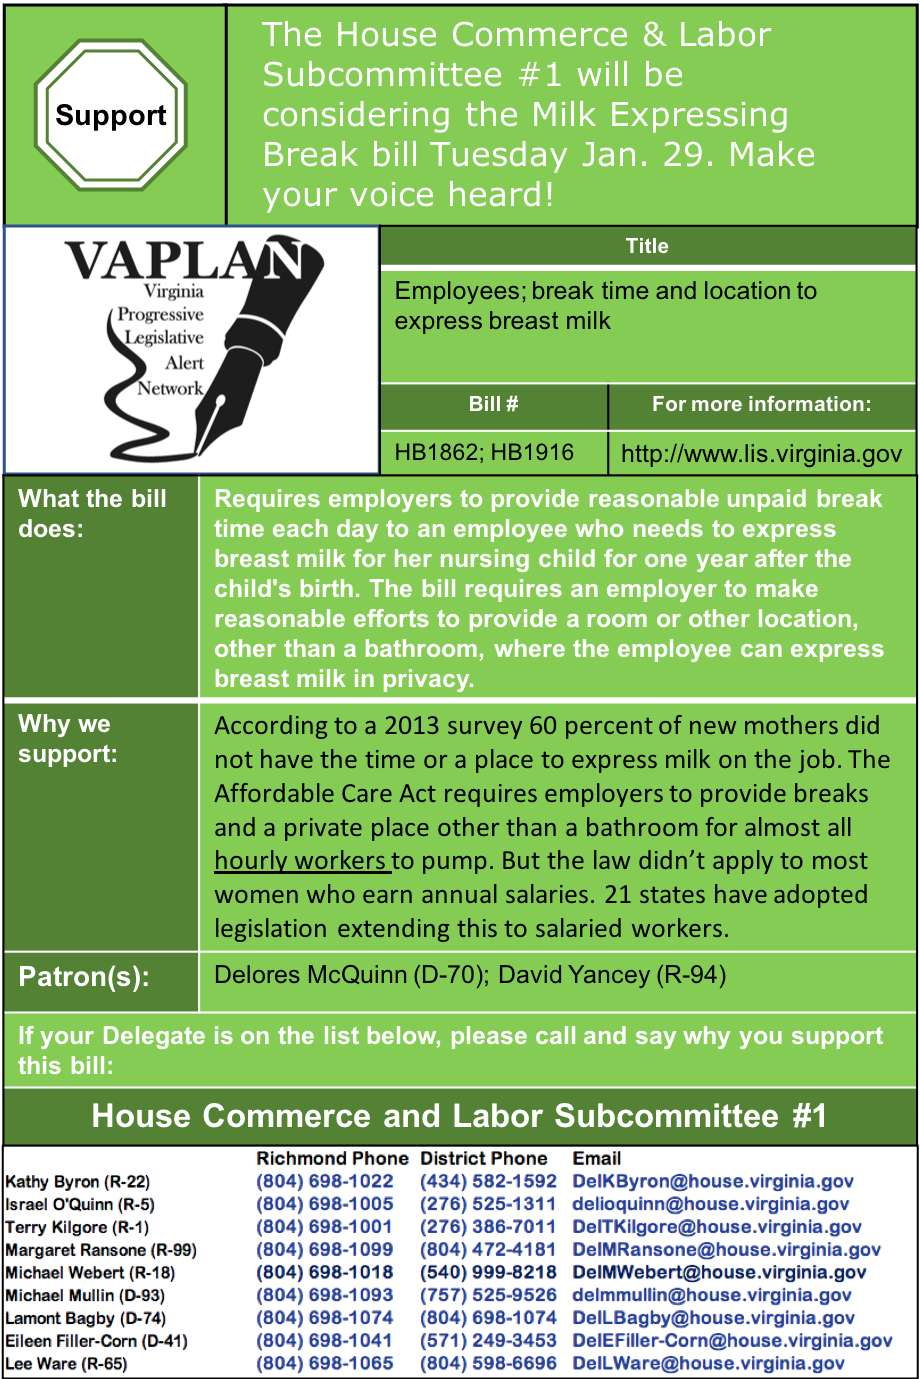 ALERT: Require employers to provide break and space for worker’s to express milk, House Commerce & Labor Subcommittee 1, Tuesday Jan. 29.